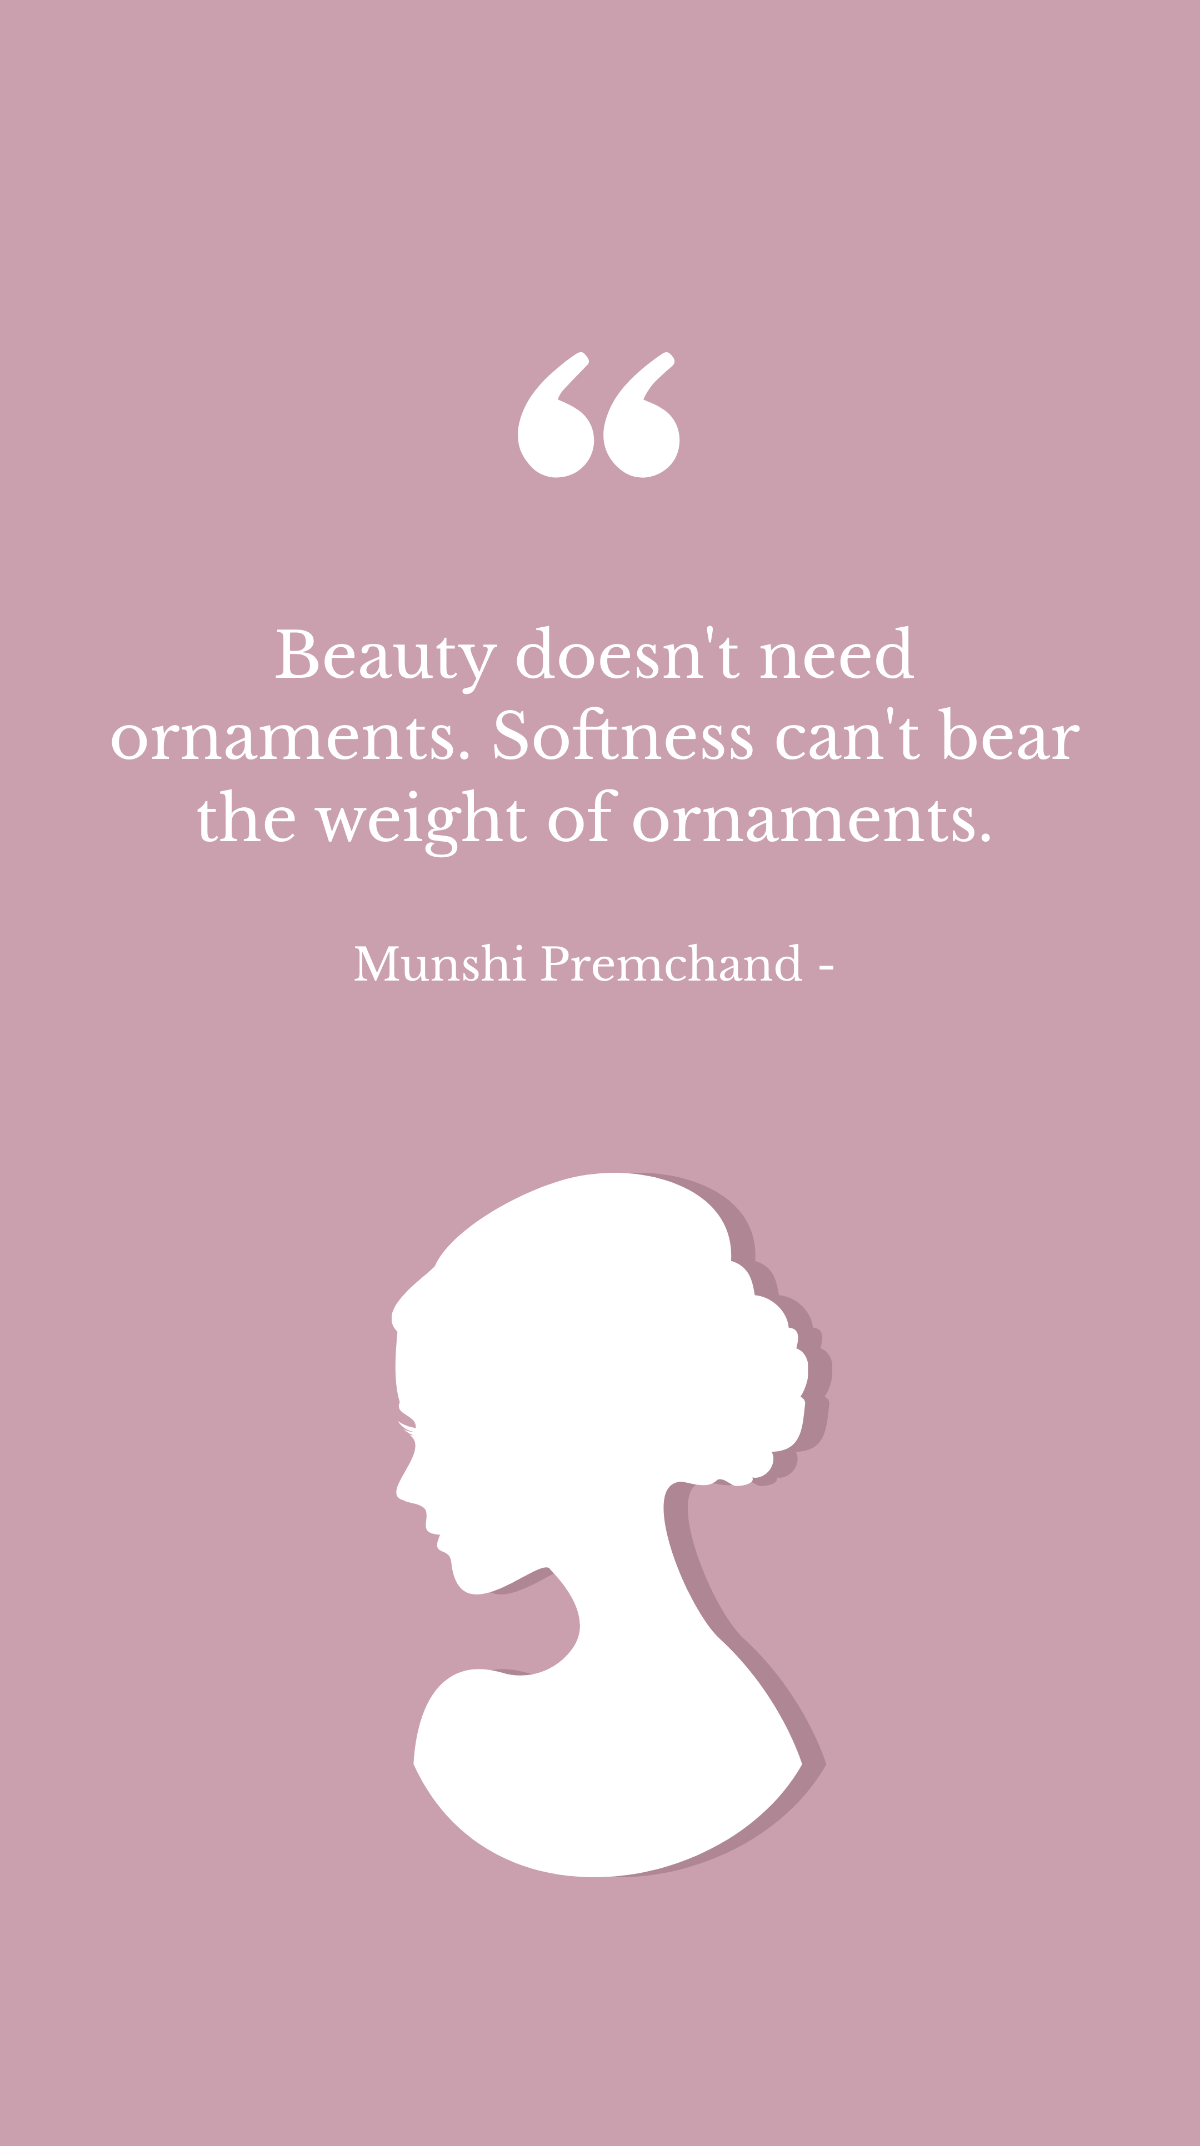 Free Munshi Premchand - Beauty doesn't need ornaments. Softness can't bear the weight of ornaments. Template